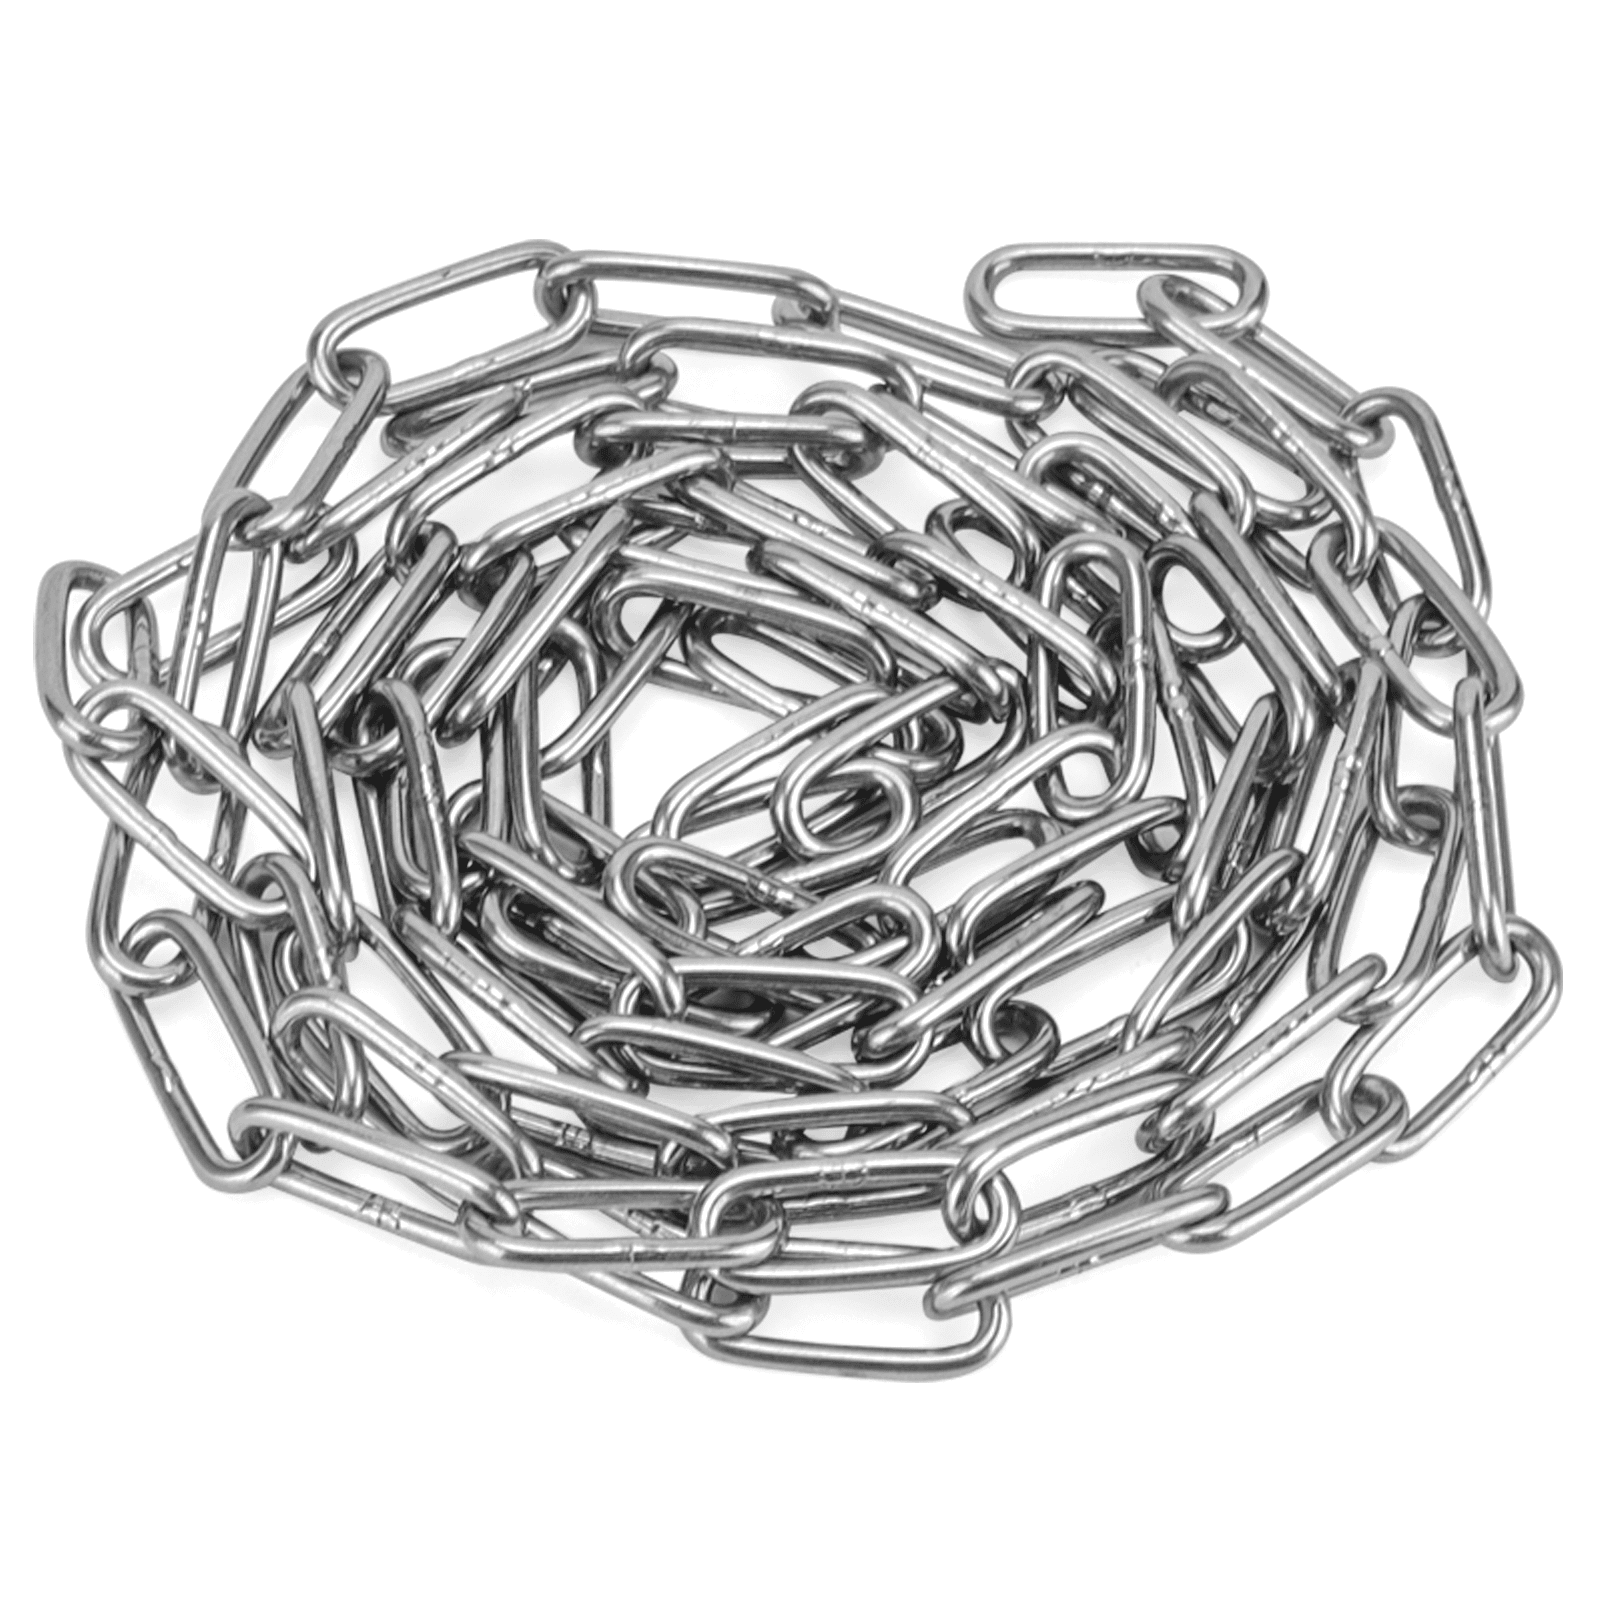 KEILEOHO 16.5 Feet 4mm Stainless Steel Chain, Heavy Duty Metal Link Chain,  Decorative Chains Metal Utility Chain for Hanging Plant, Hanging Clothes